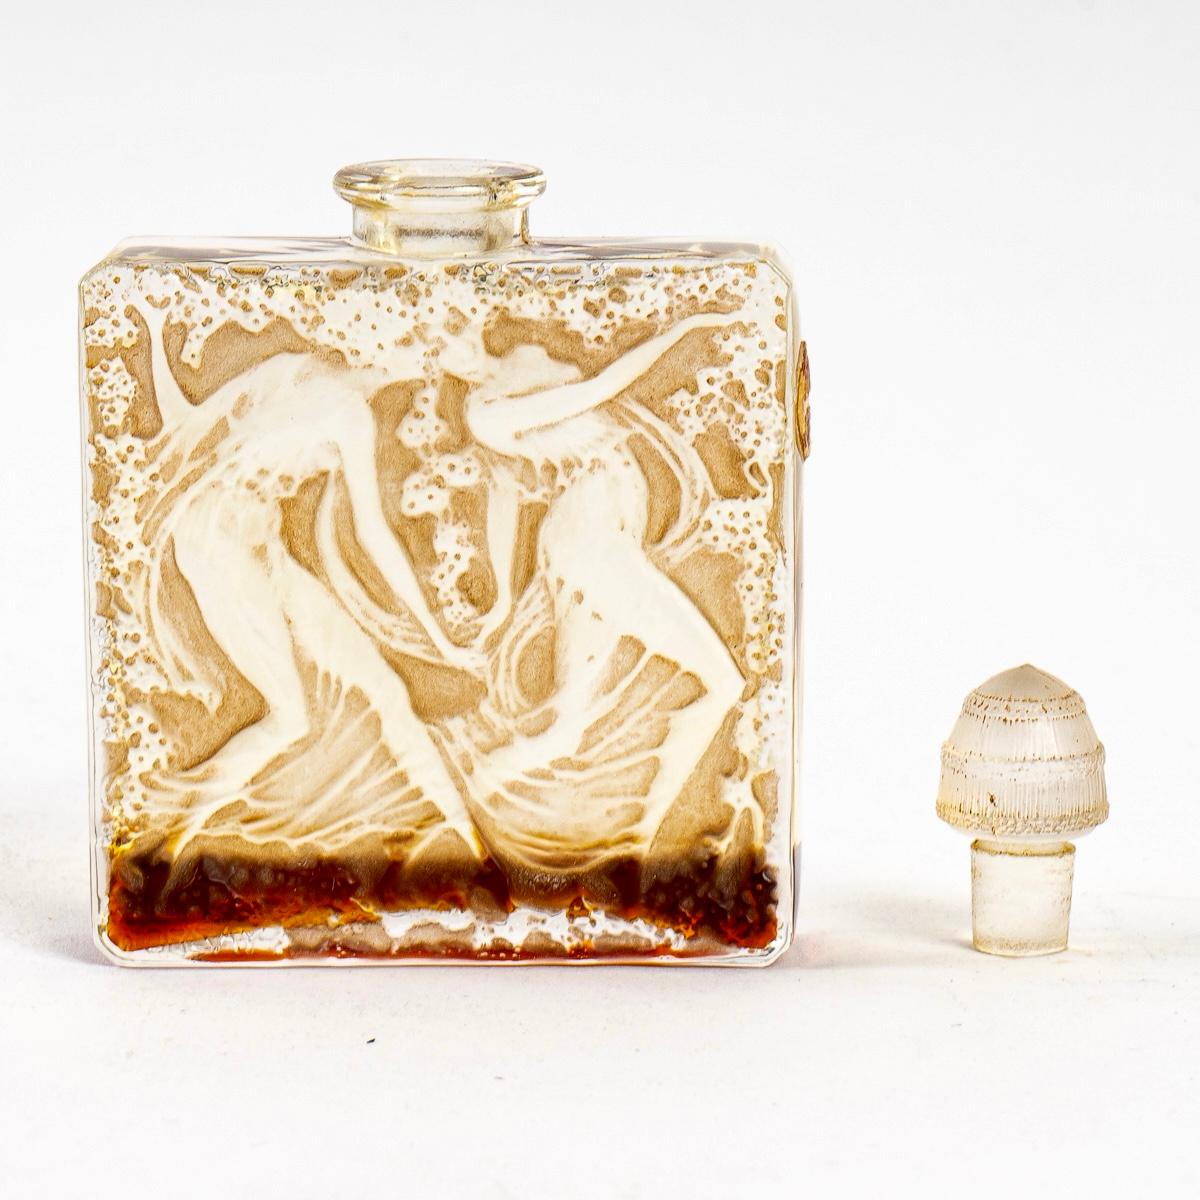 French 1923 Rene Lalique Elegance D'Orsay Perfume Bottle Glass Sepia Patina Label & Box